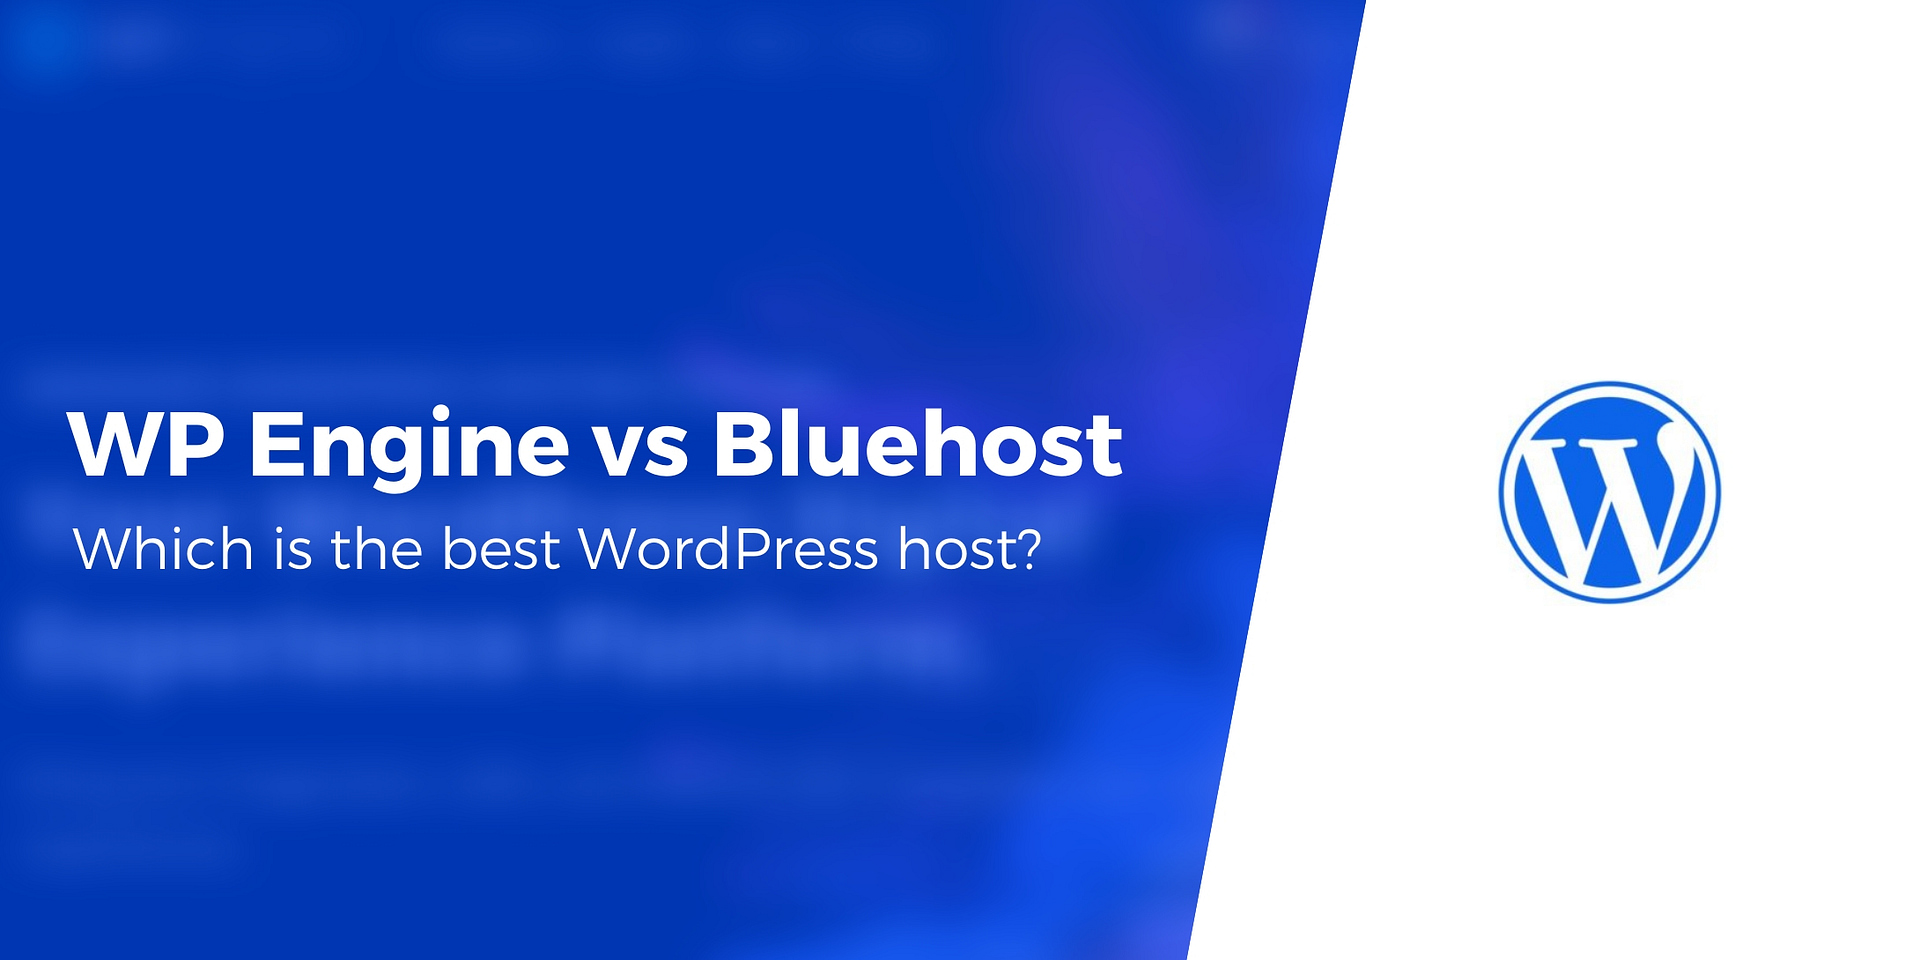 Wp Engine Vs Bluehost Which Is The Best Host For Wordpress Images, Photos, Reviews